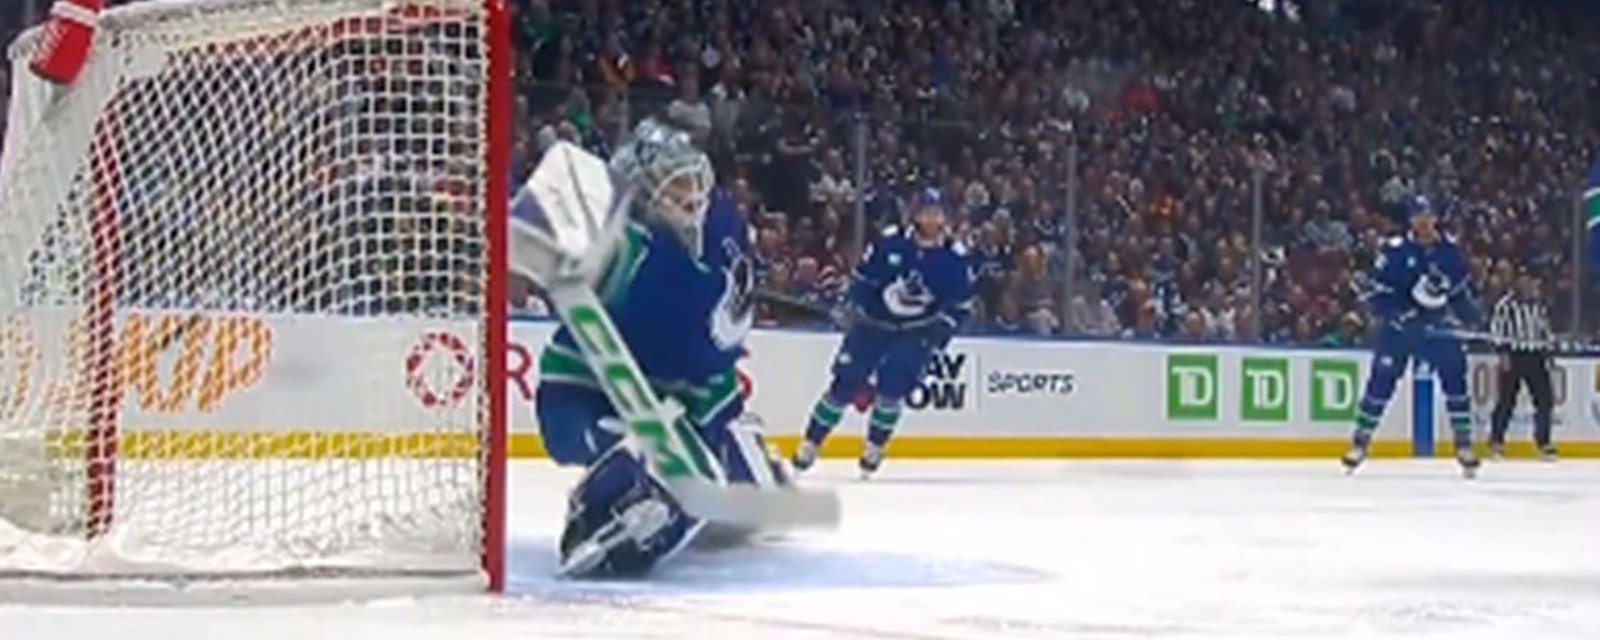 Silovs makes an insane diving save early in Game 7